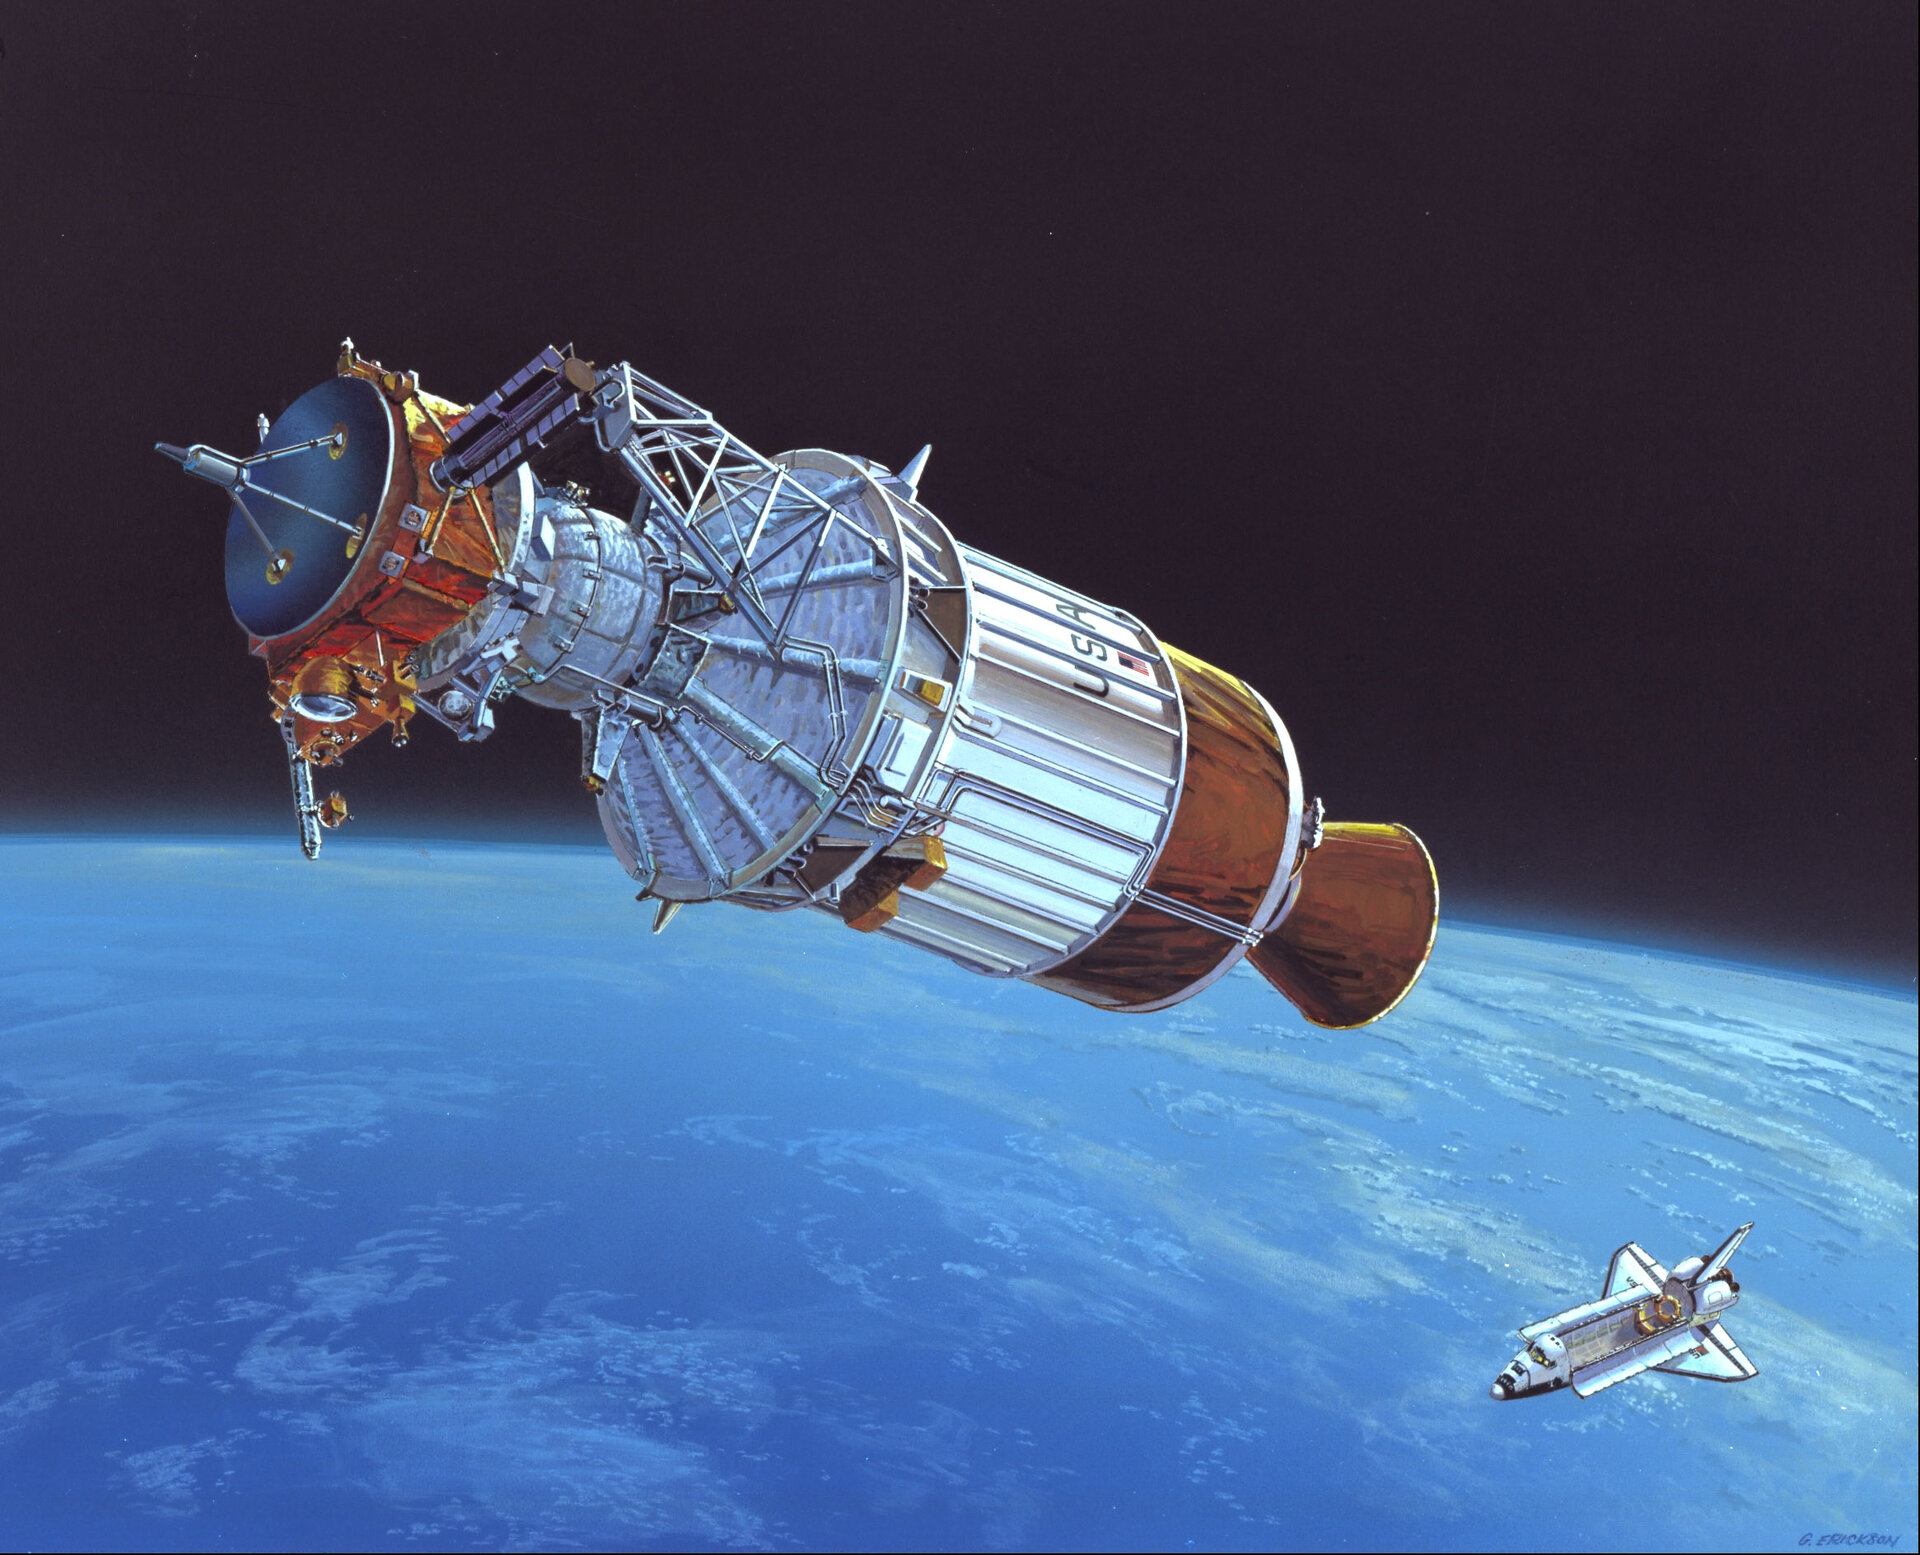 Artist's impression of Ulysses released from the Space Shuttle, 6 October 1990